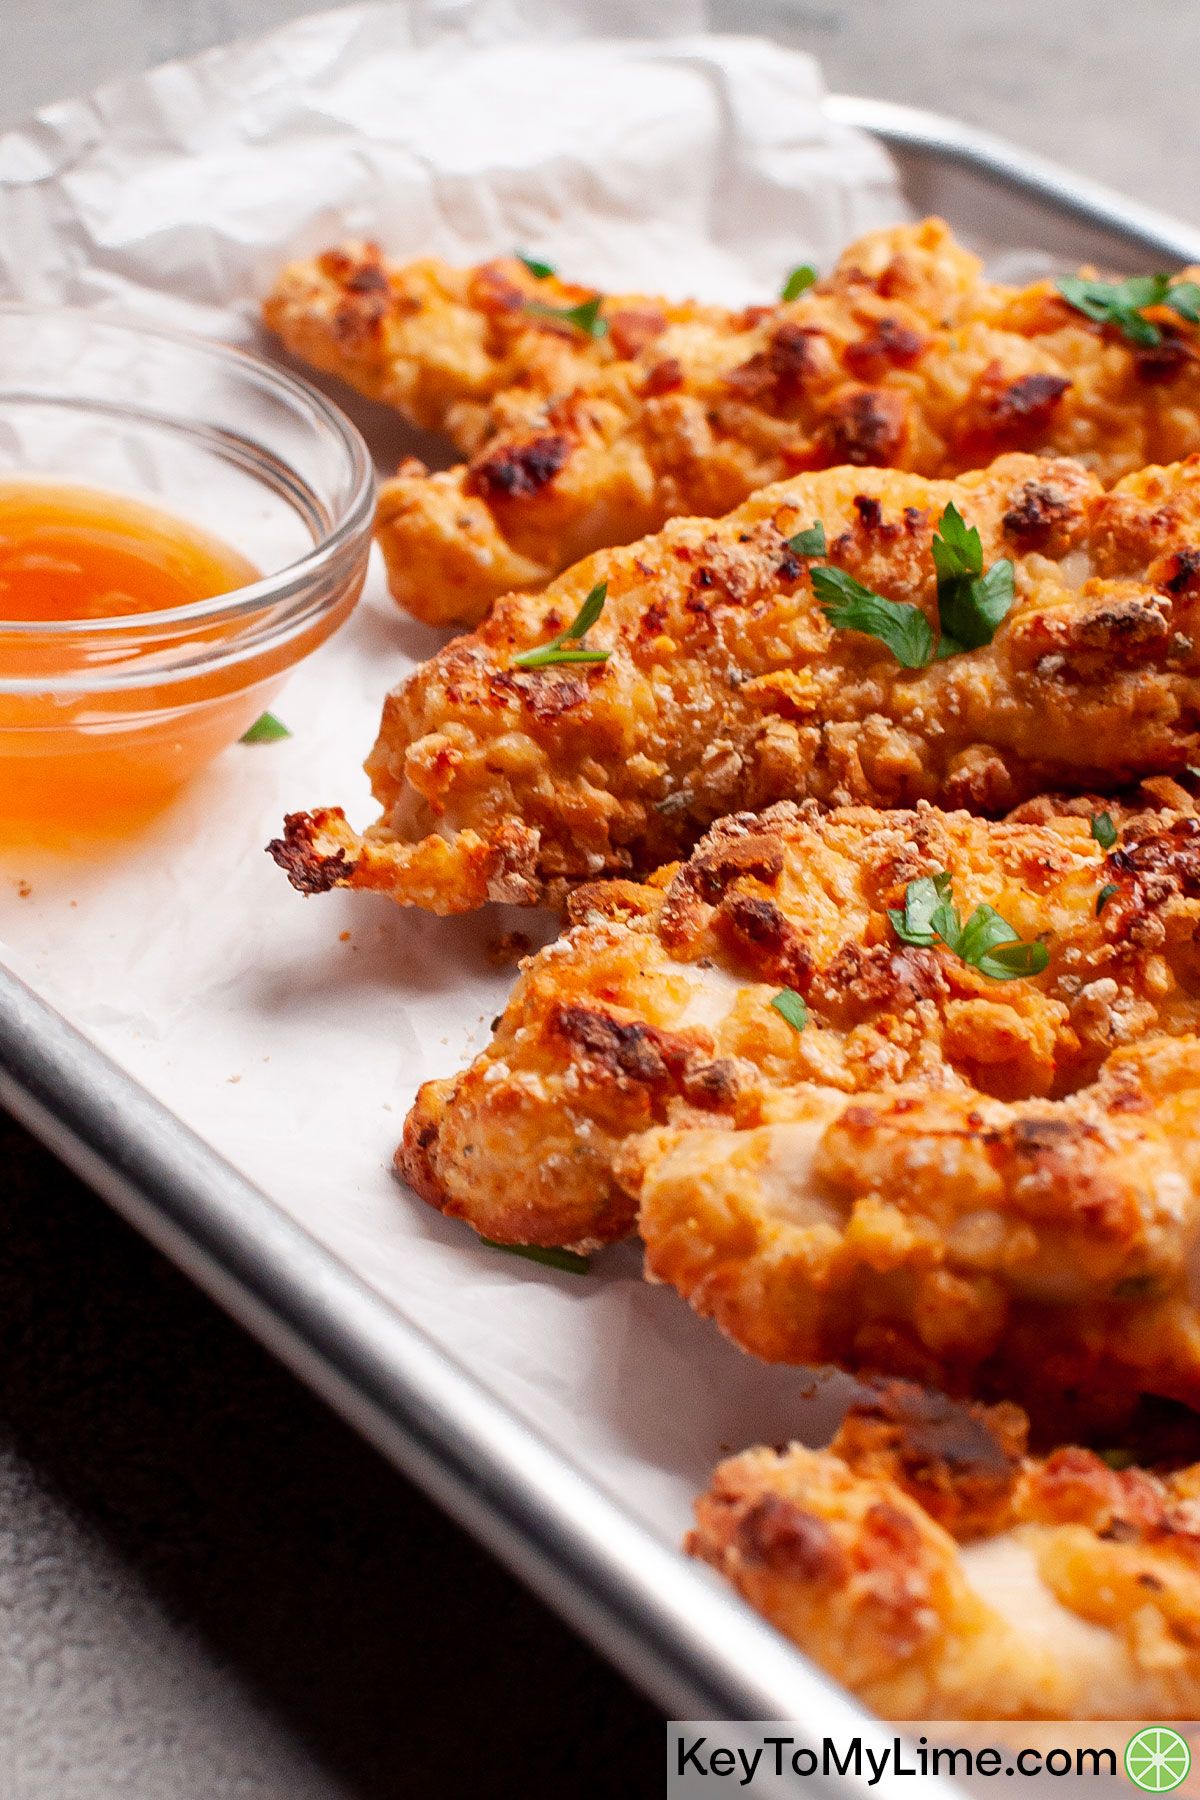 Chicken tenders on a small baking sheet next to a container of plum sauce.